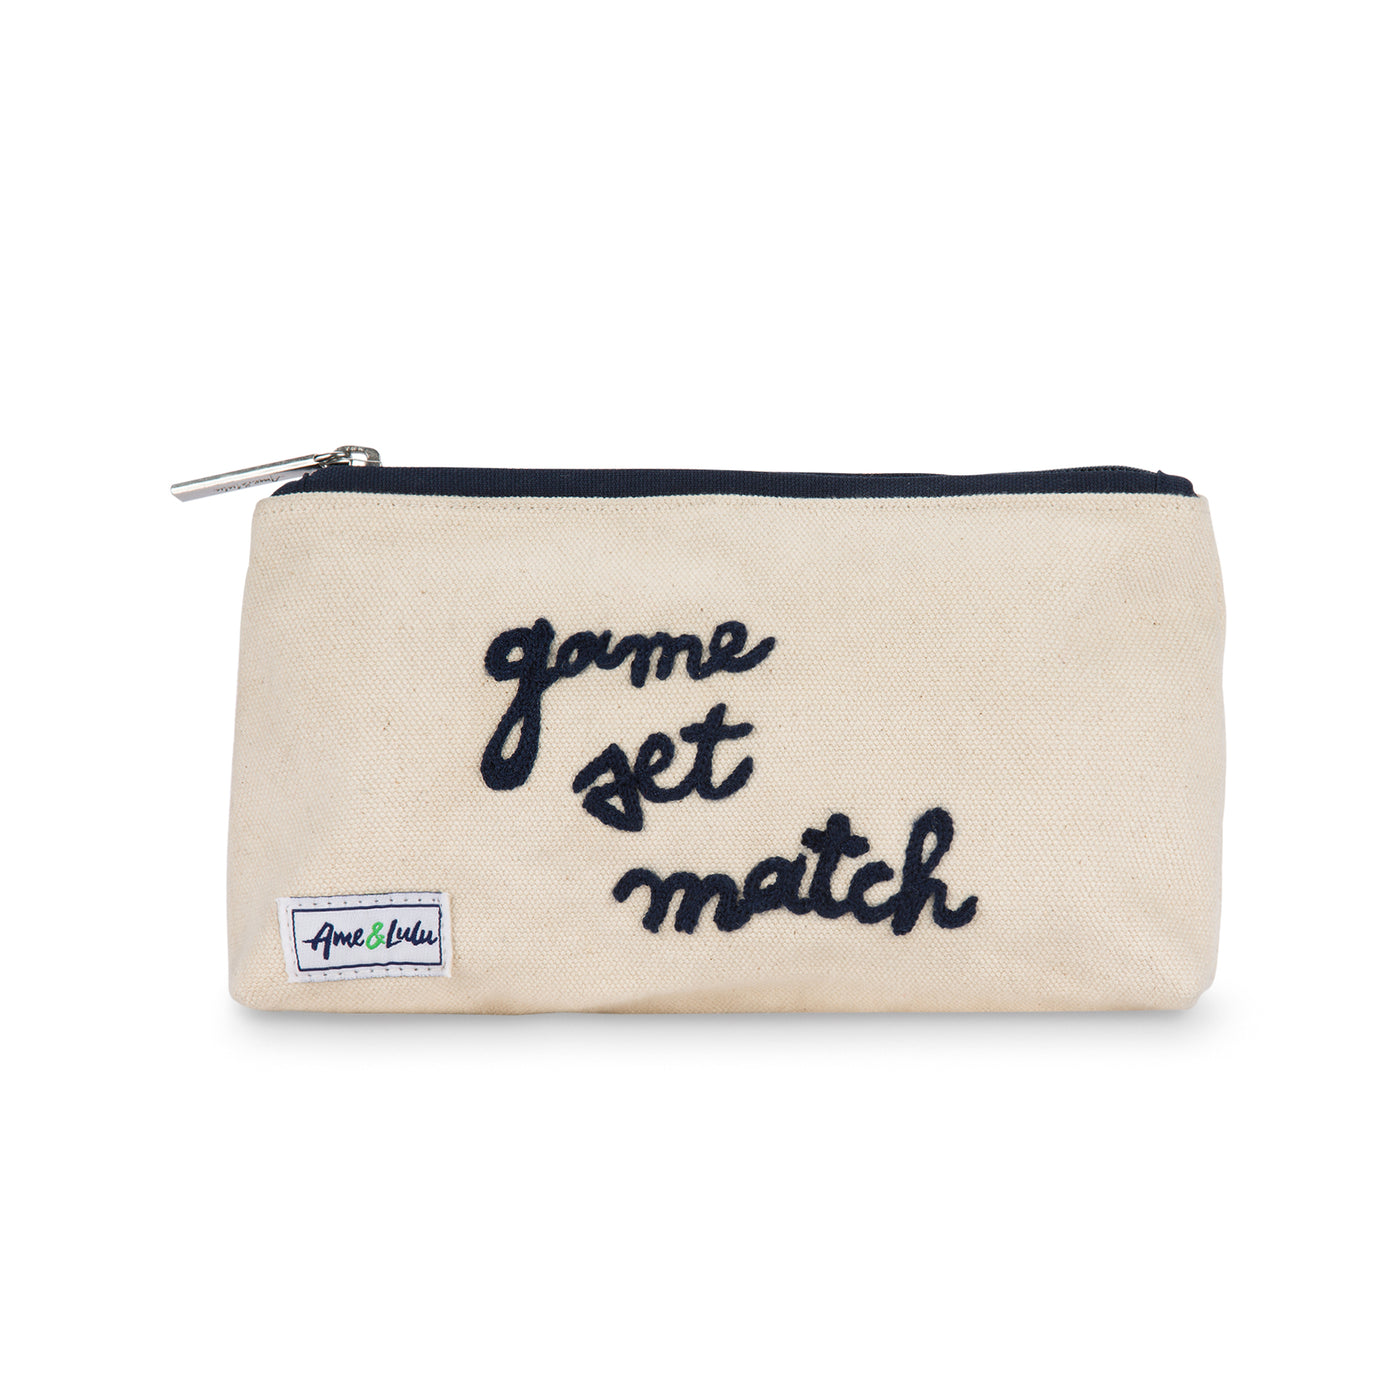 Front view of small canvas makeup pouch with navy zipper. Front has the words game set match embroidered on.